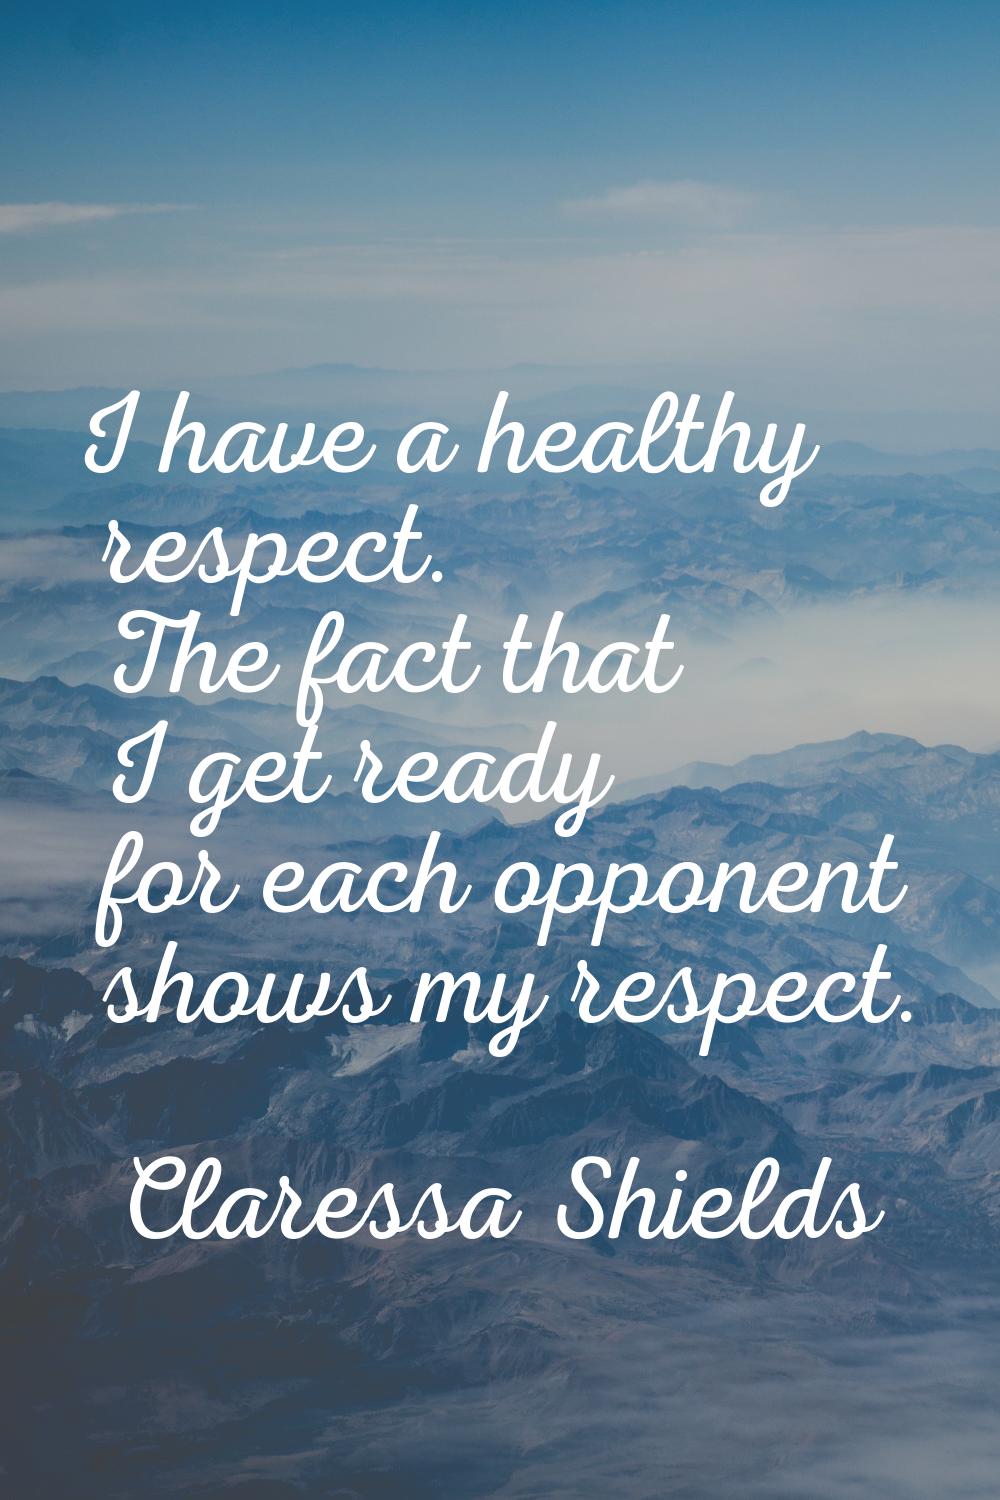 I have a healthy respect. The fact that I get ready for each opponent shows my respect.